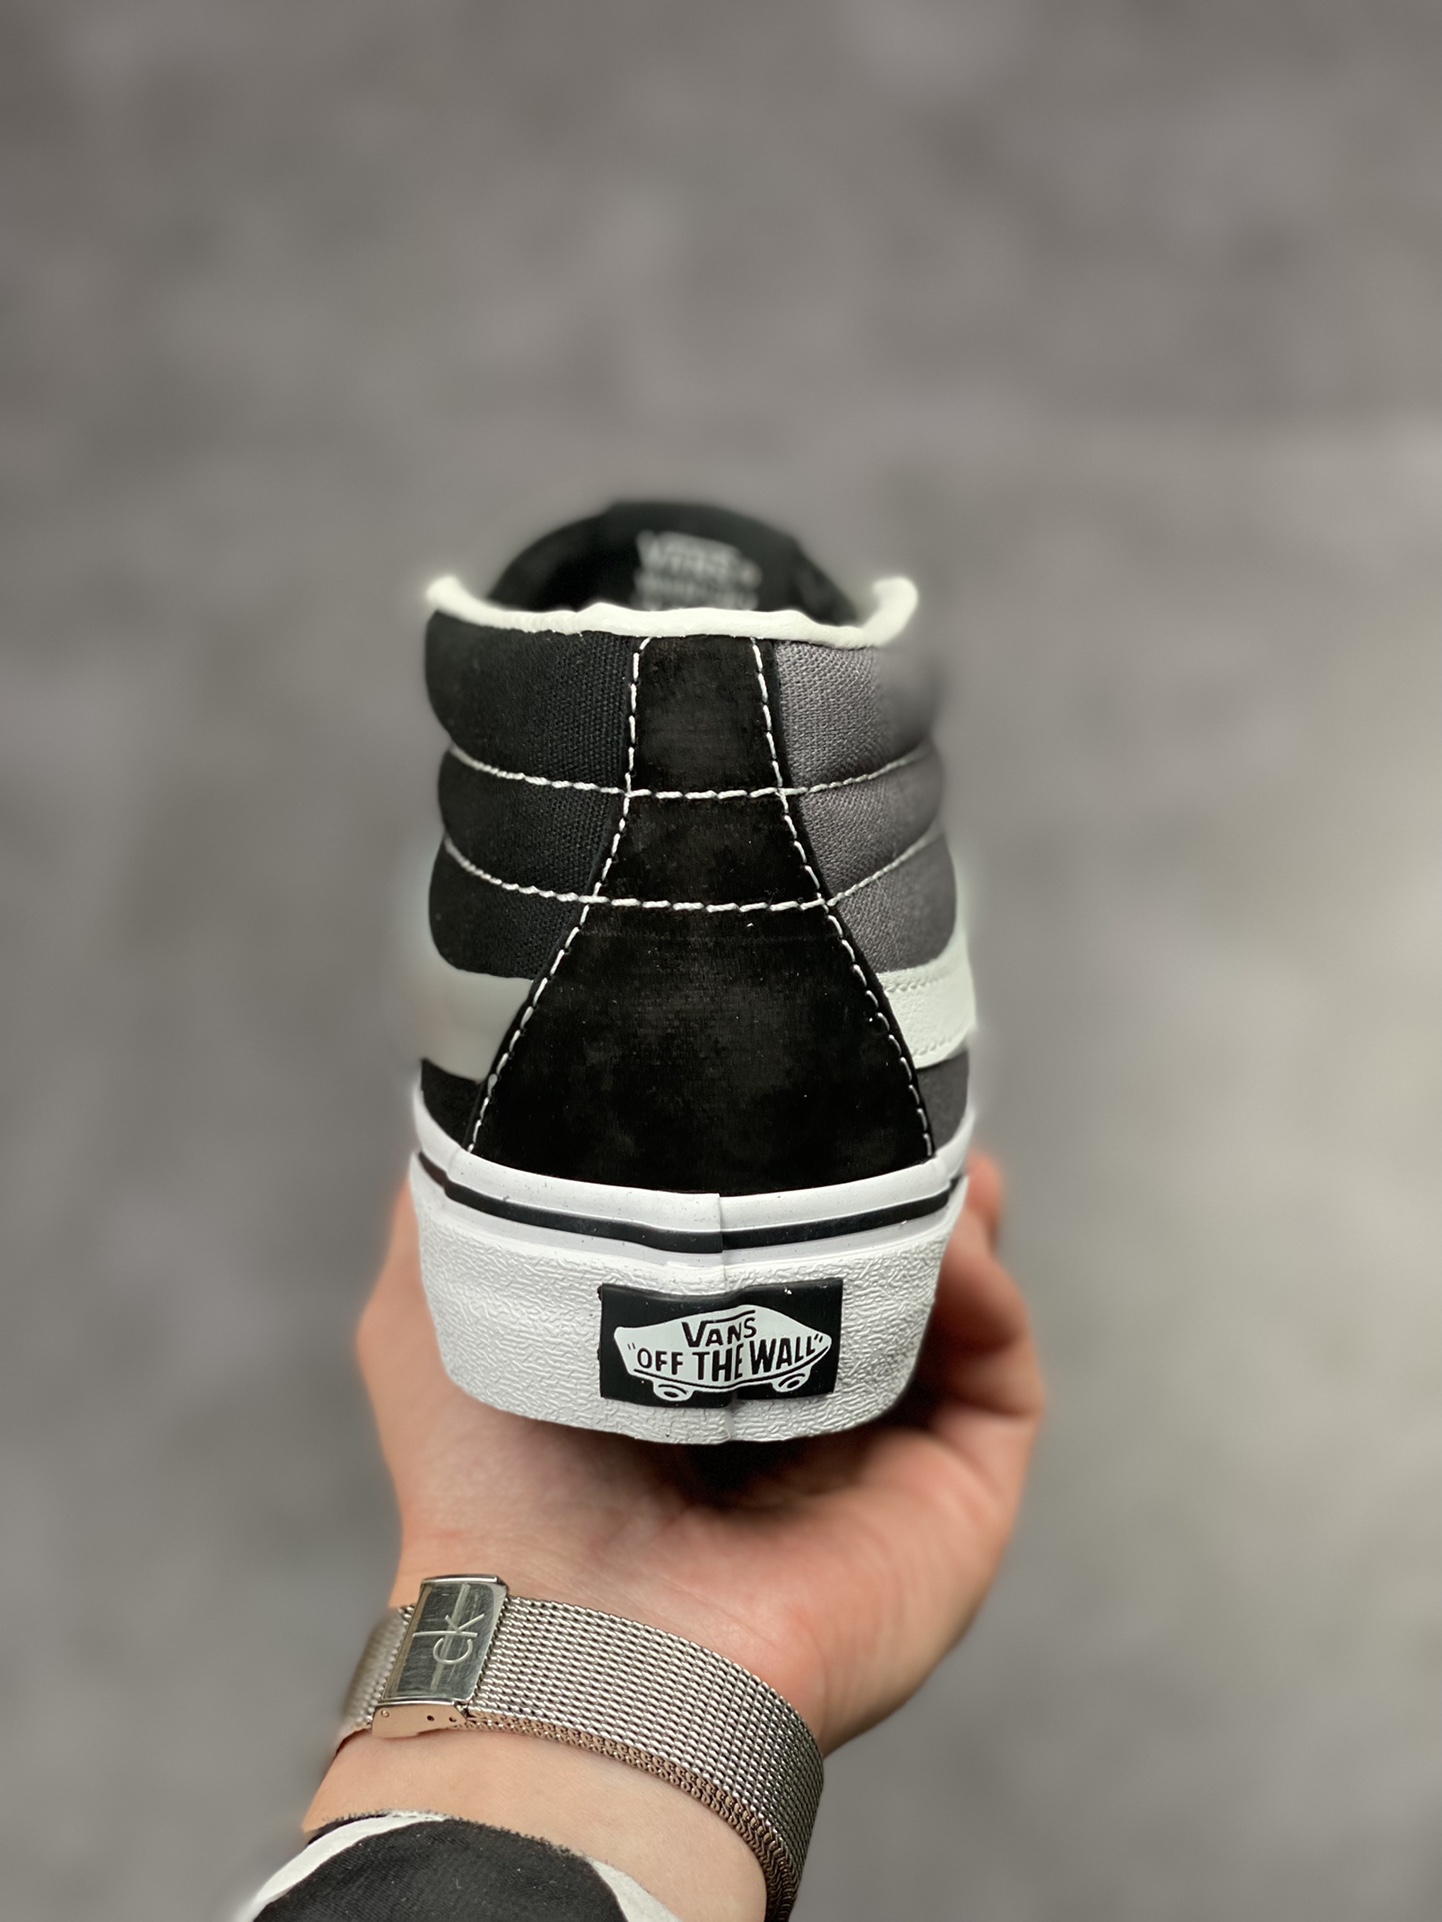 Vans SK8 Mid Vans black and gray color matching retro casual non-slip men's and women's mid-top canvas shoes skateboard shoes